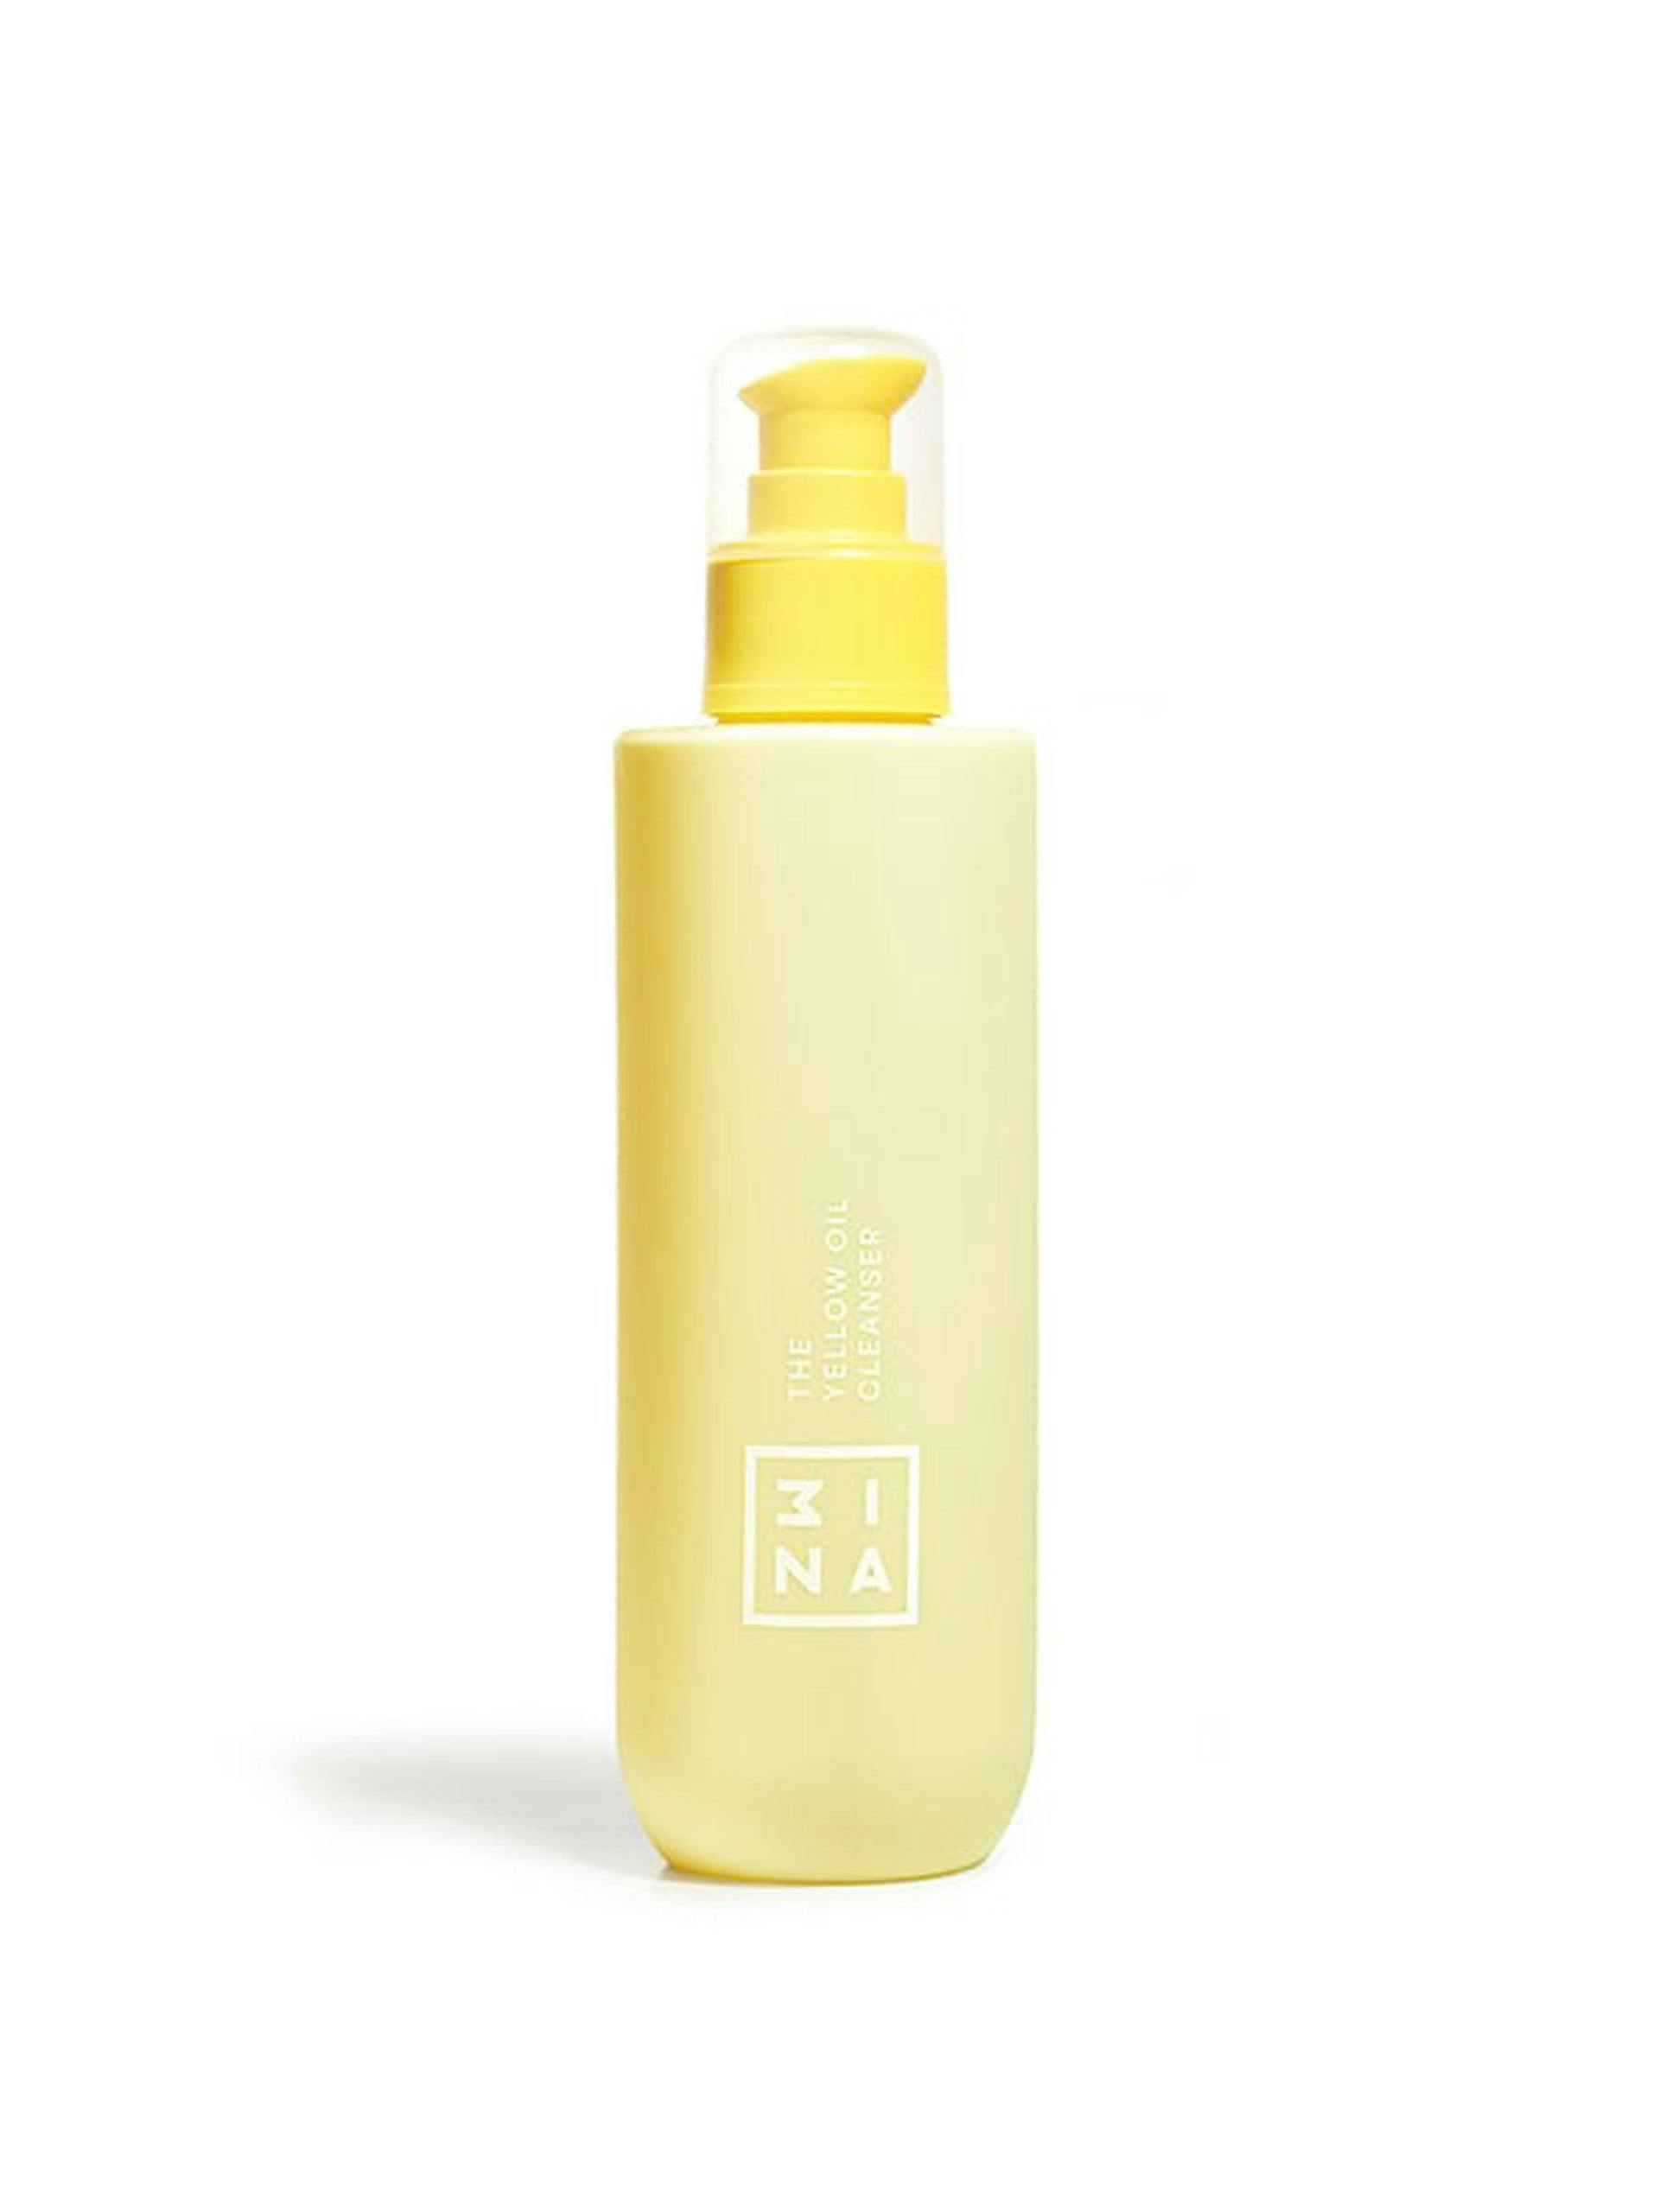 The Yellow oil cleanser